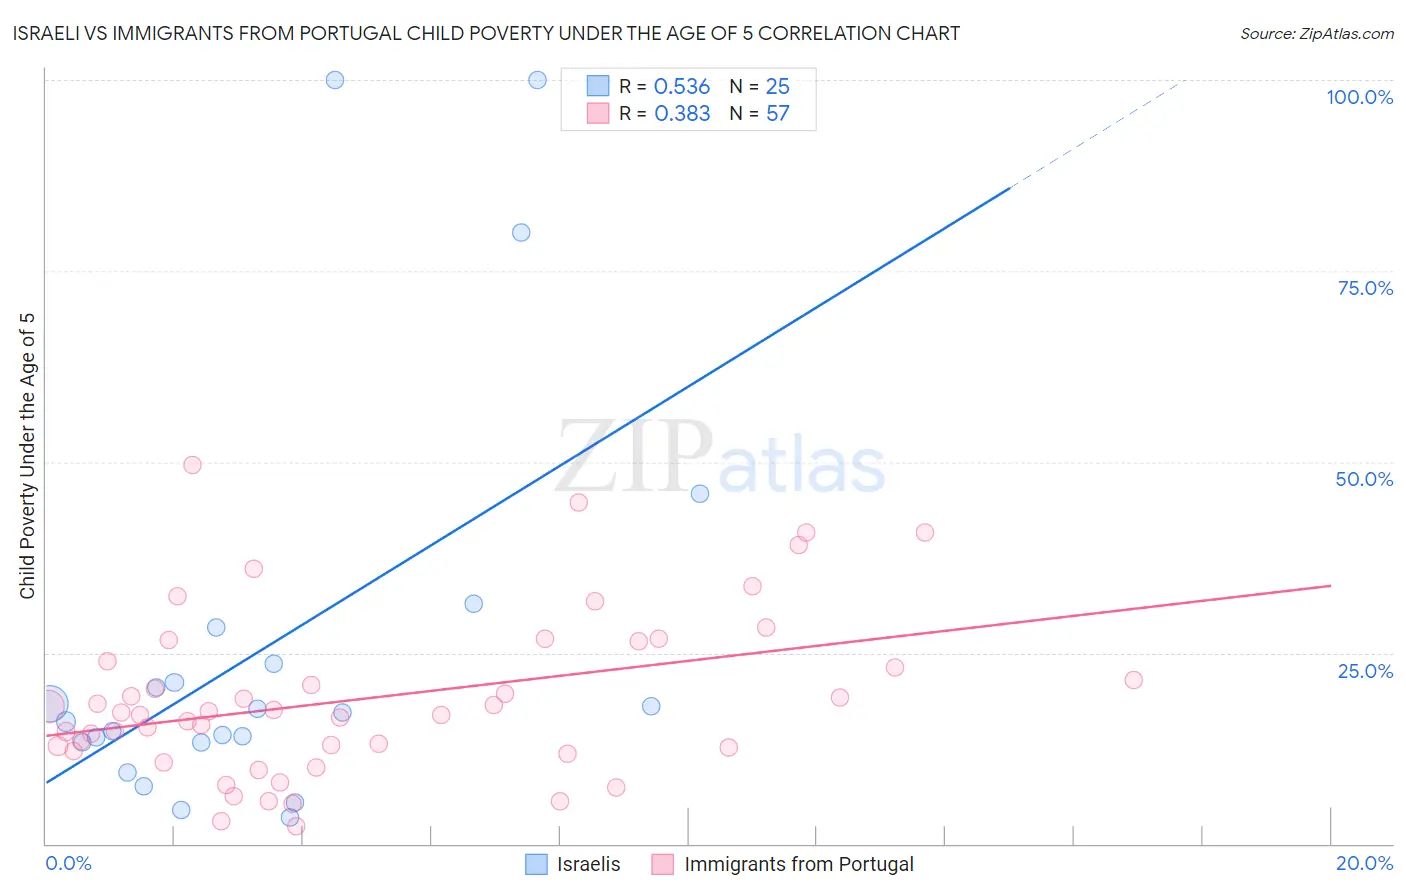 Israeli vs Immigrants from Portugal Child Poverty Under the Age of 5